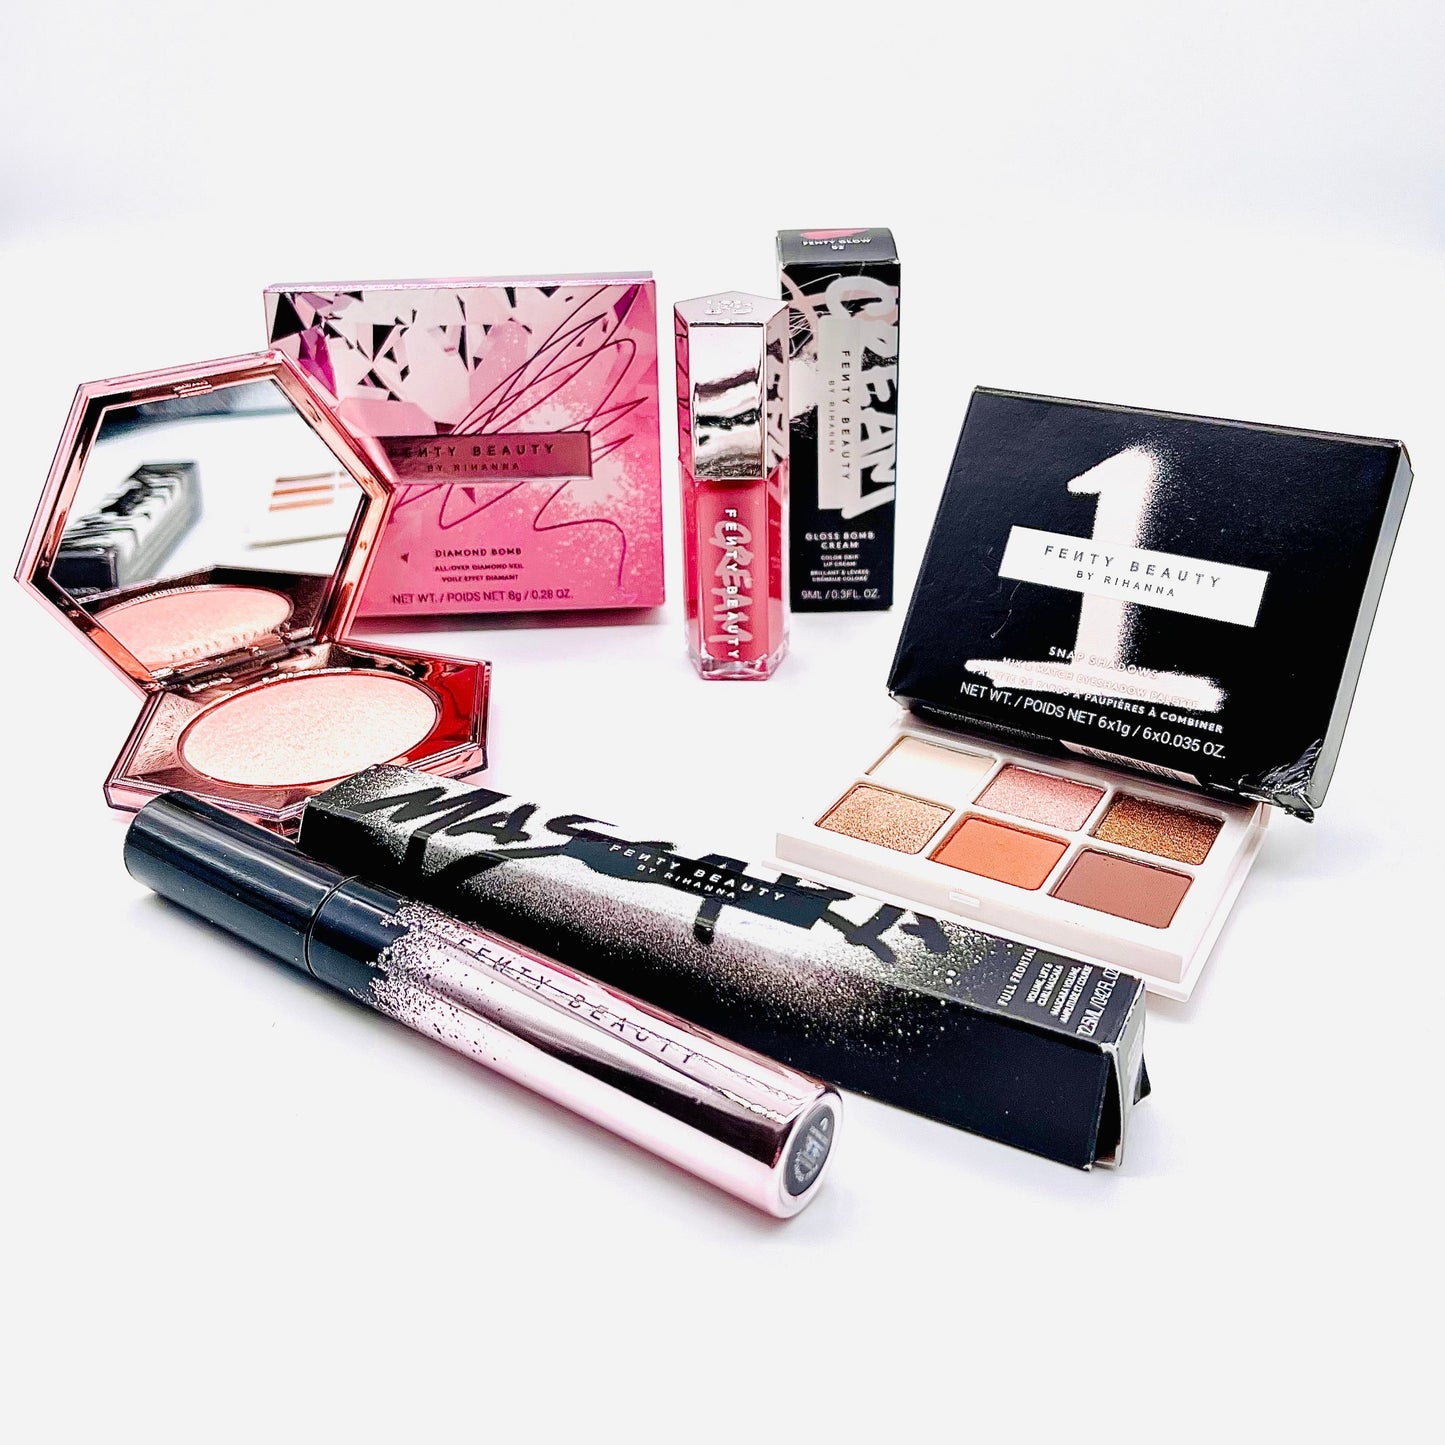 fenty beauty 4 piece designer beauty makeup set which includes mascara, lip gloss, eyeshadow and a highlighter